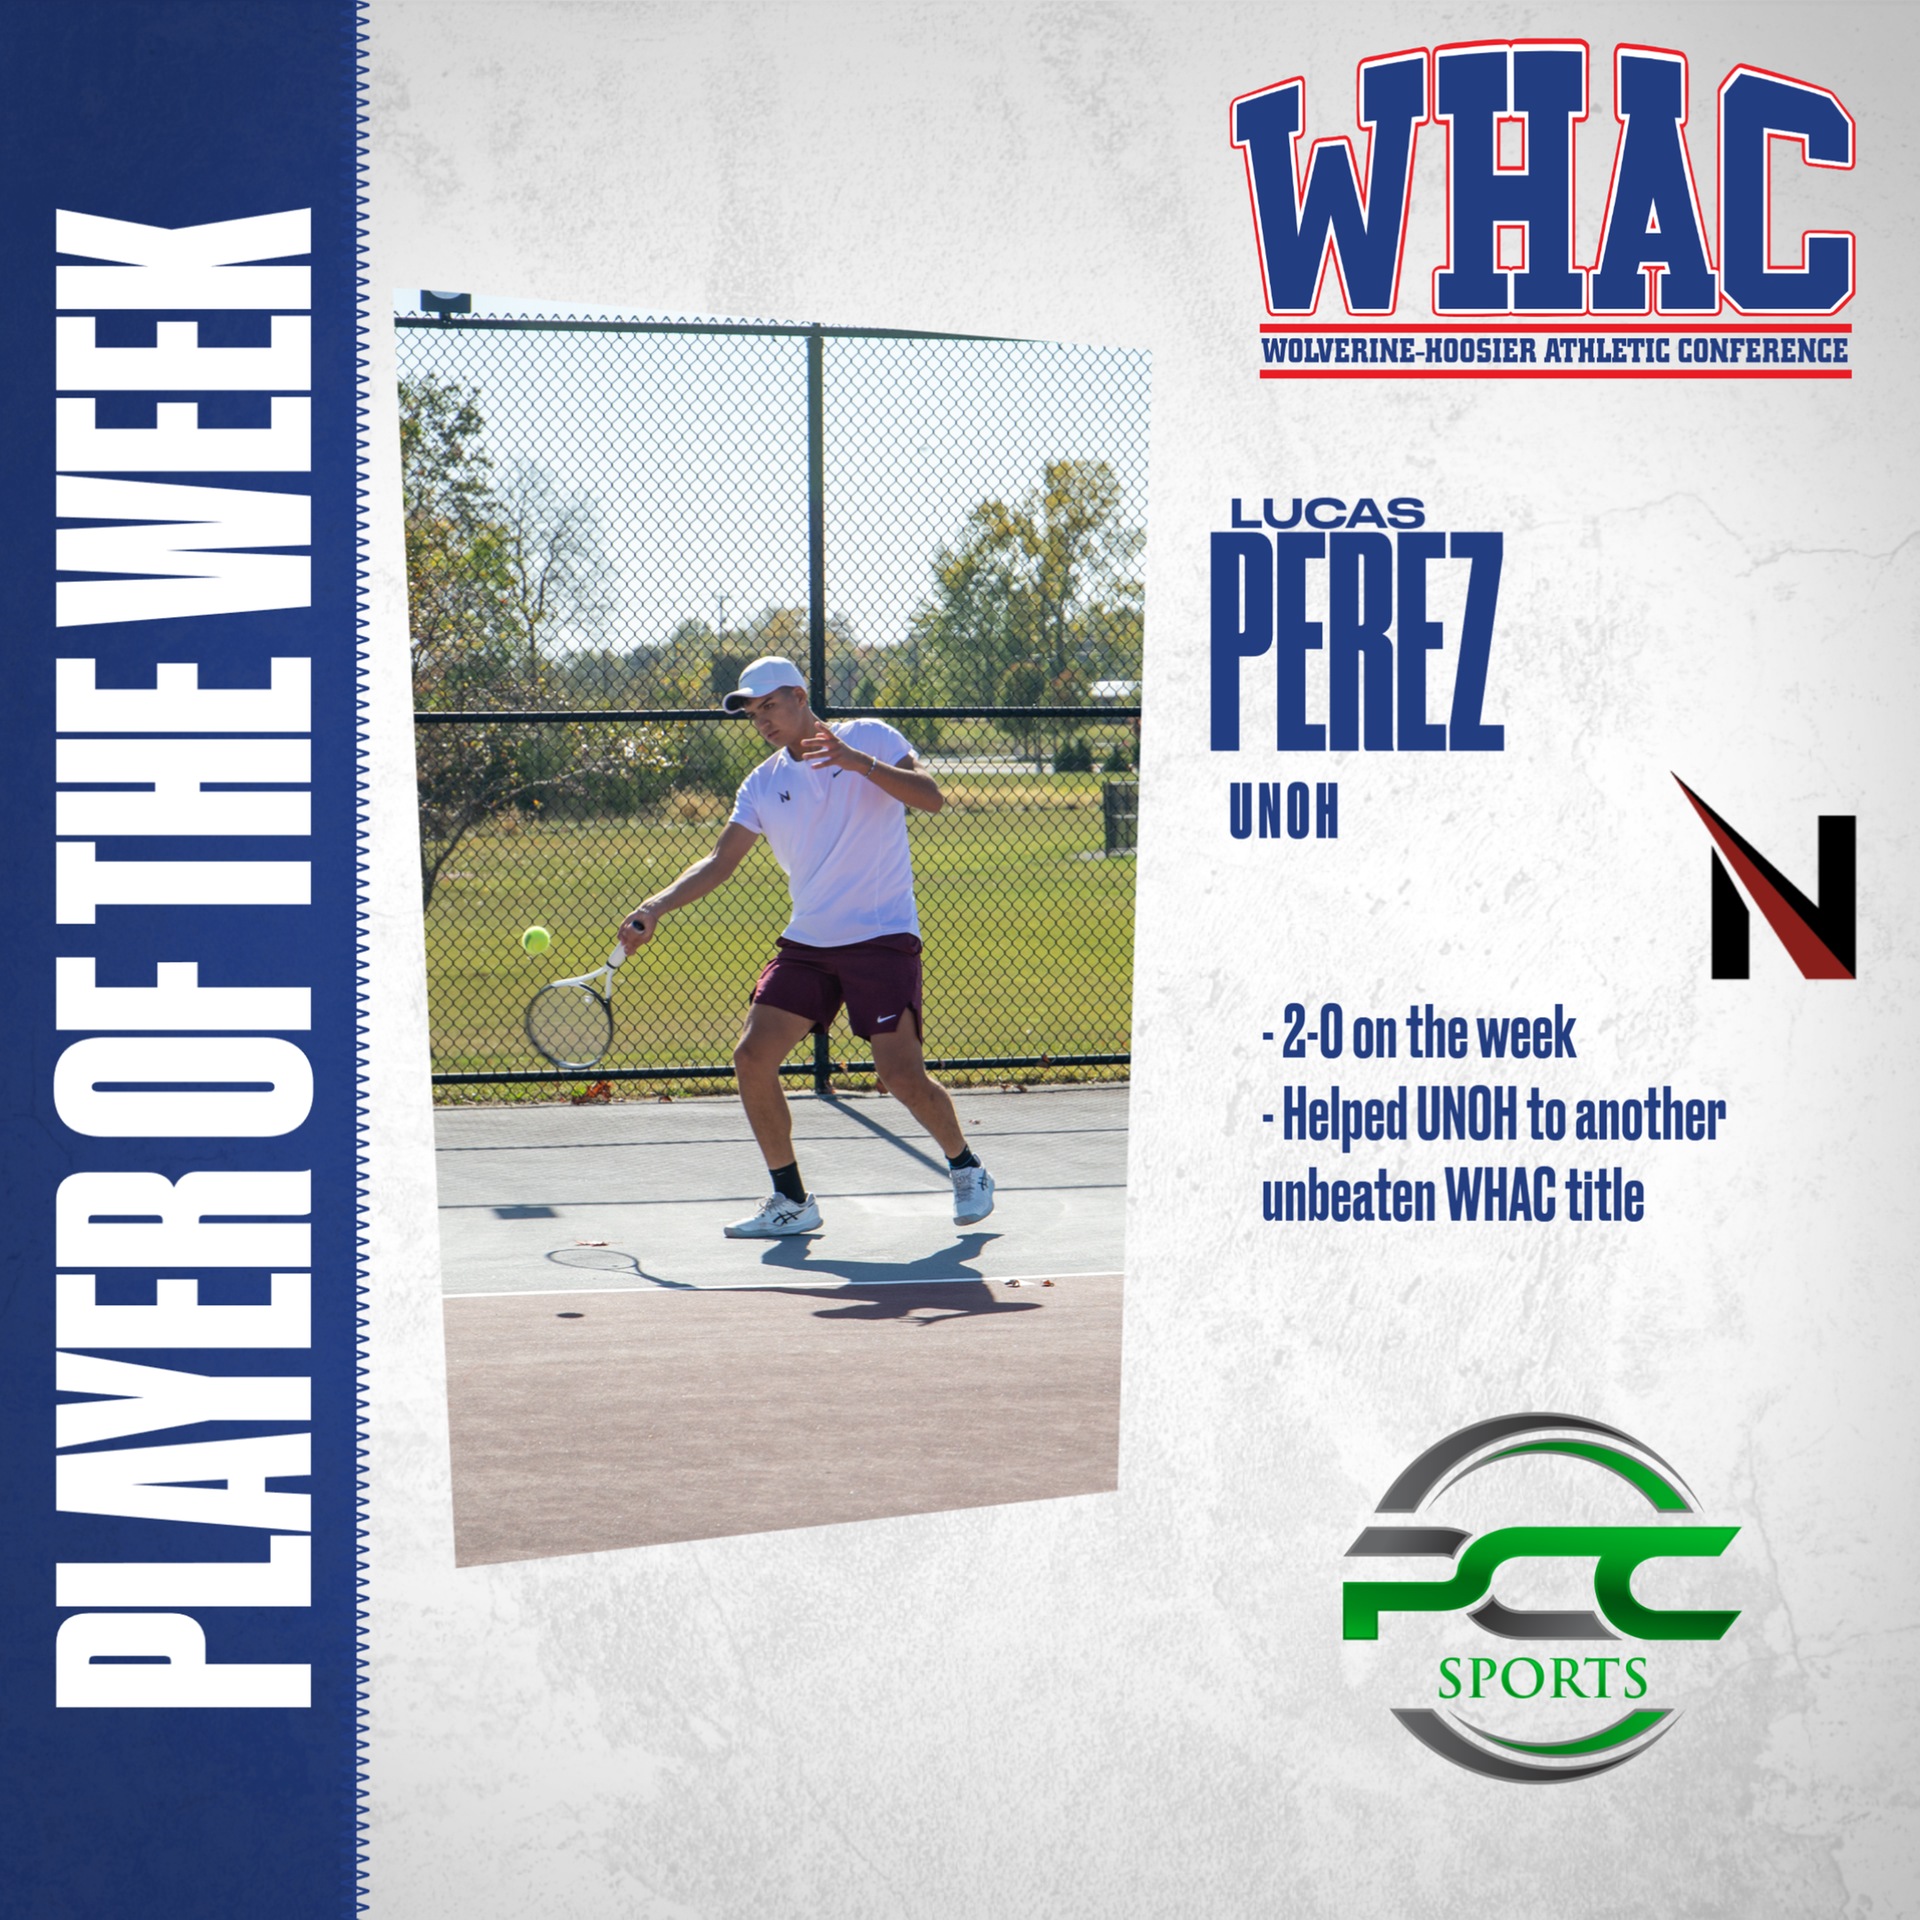 UNOH's Perez Wins Player of the Week